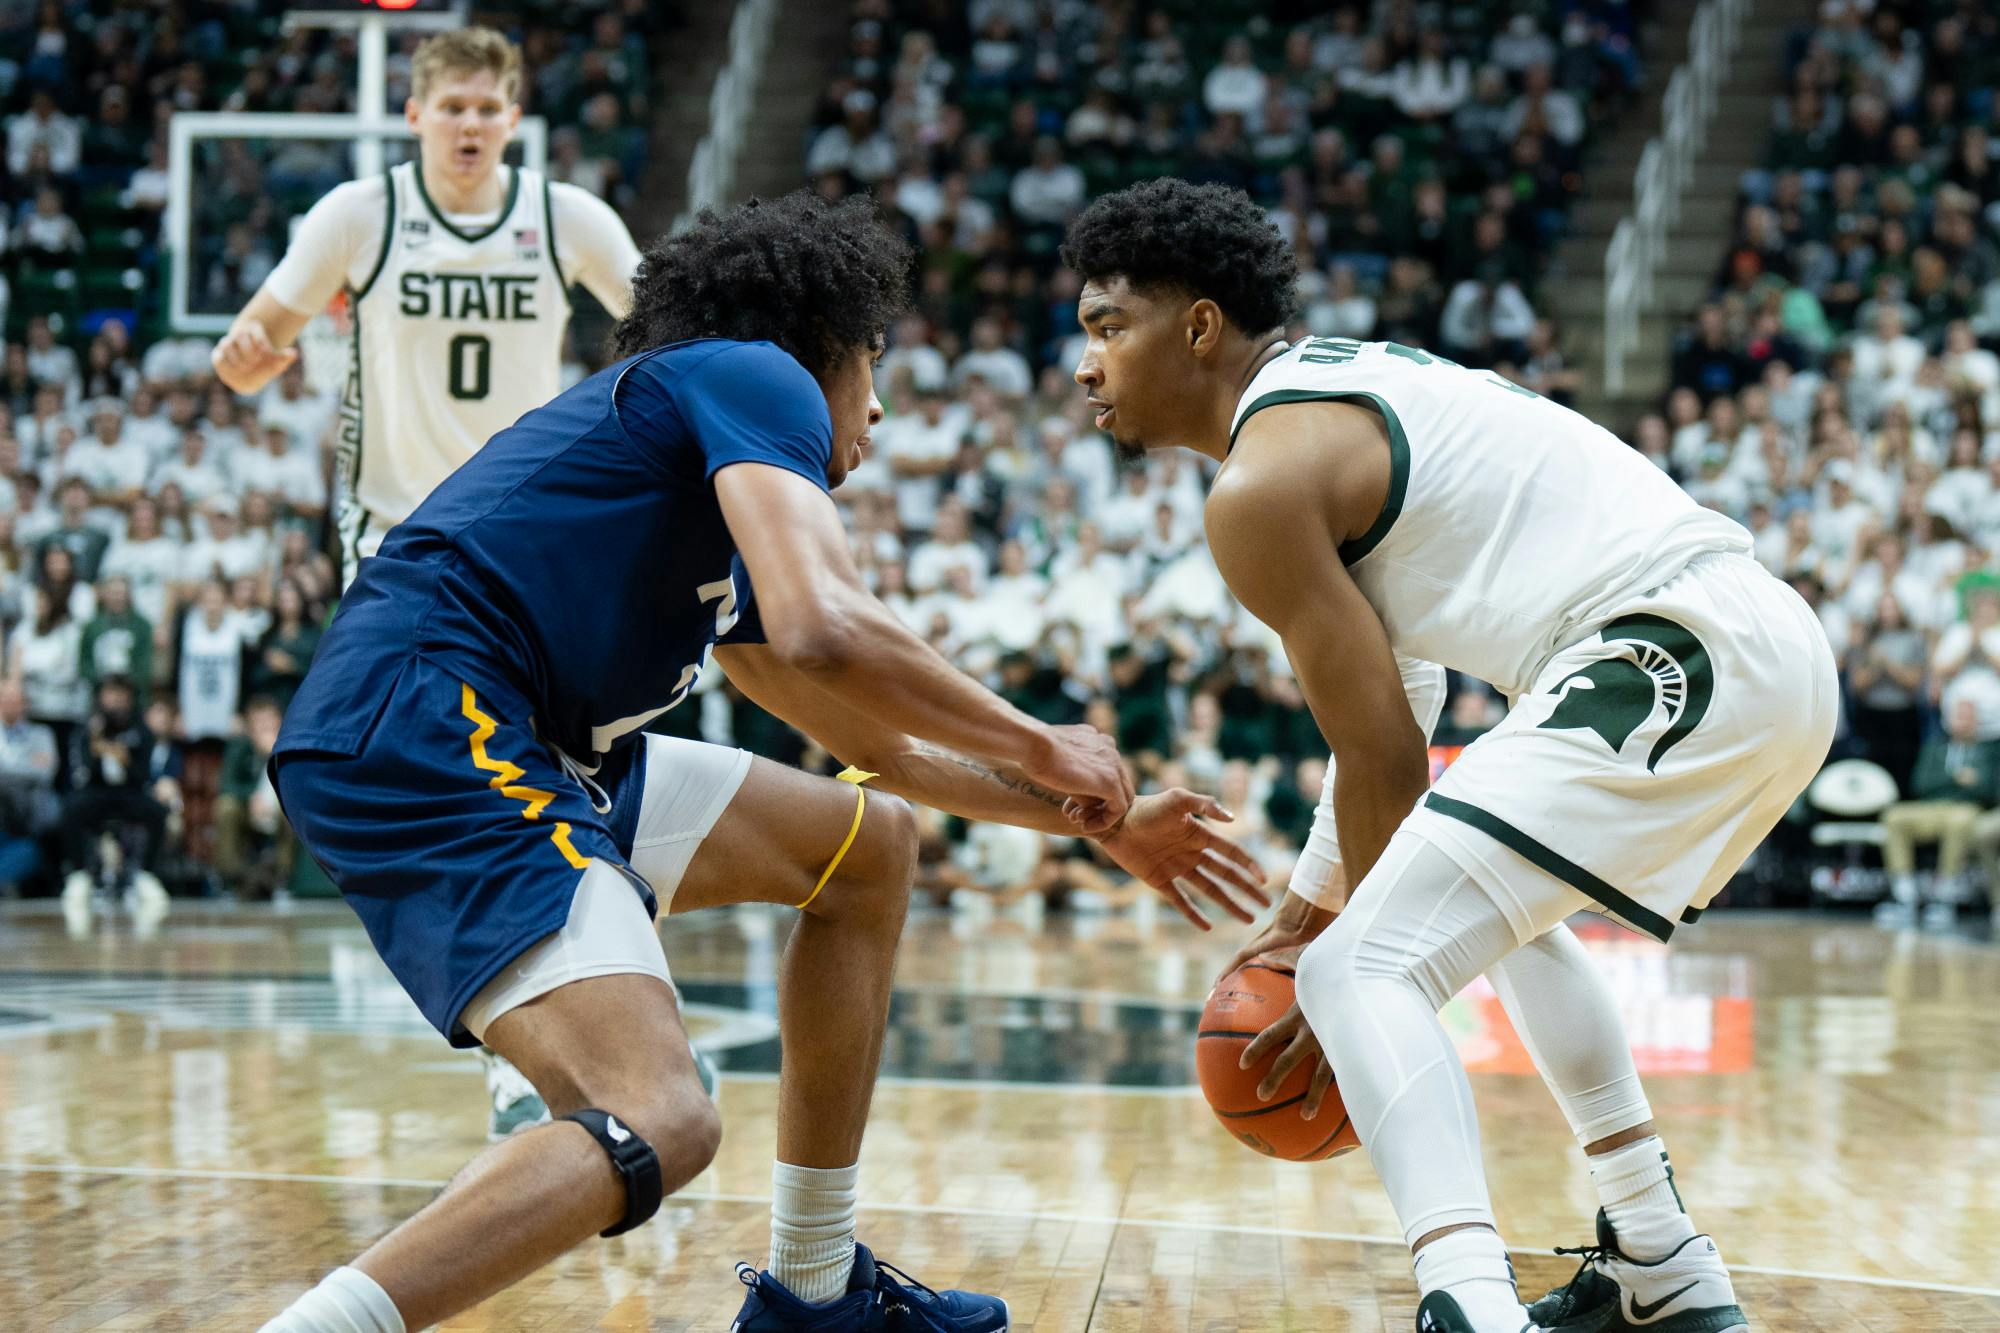 <p>Sophomore guard Jaden Akins stares down his defender during the Spartans' 73-55 win over Northern Arizona on Nov. 7, 2022.</p>